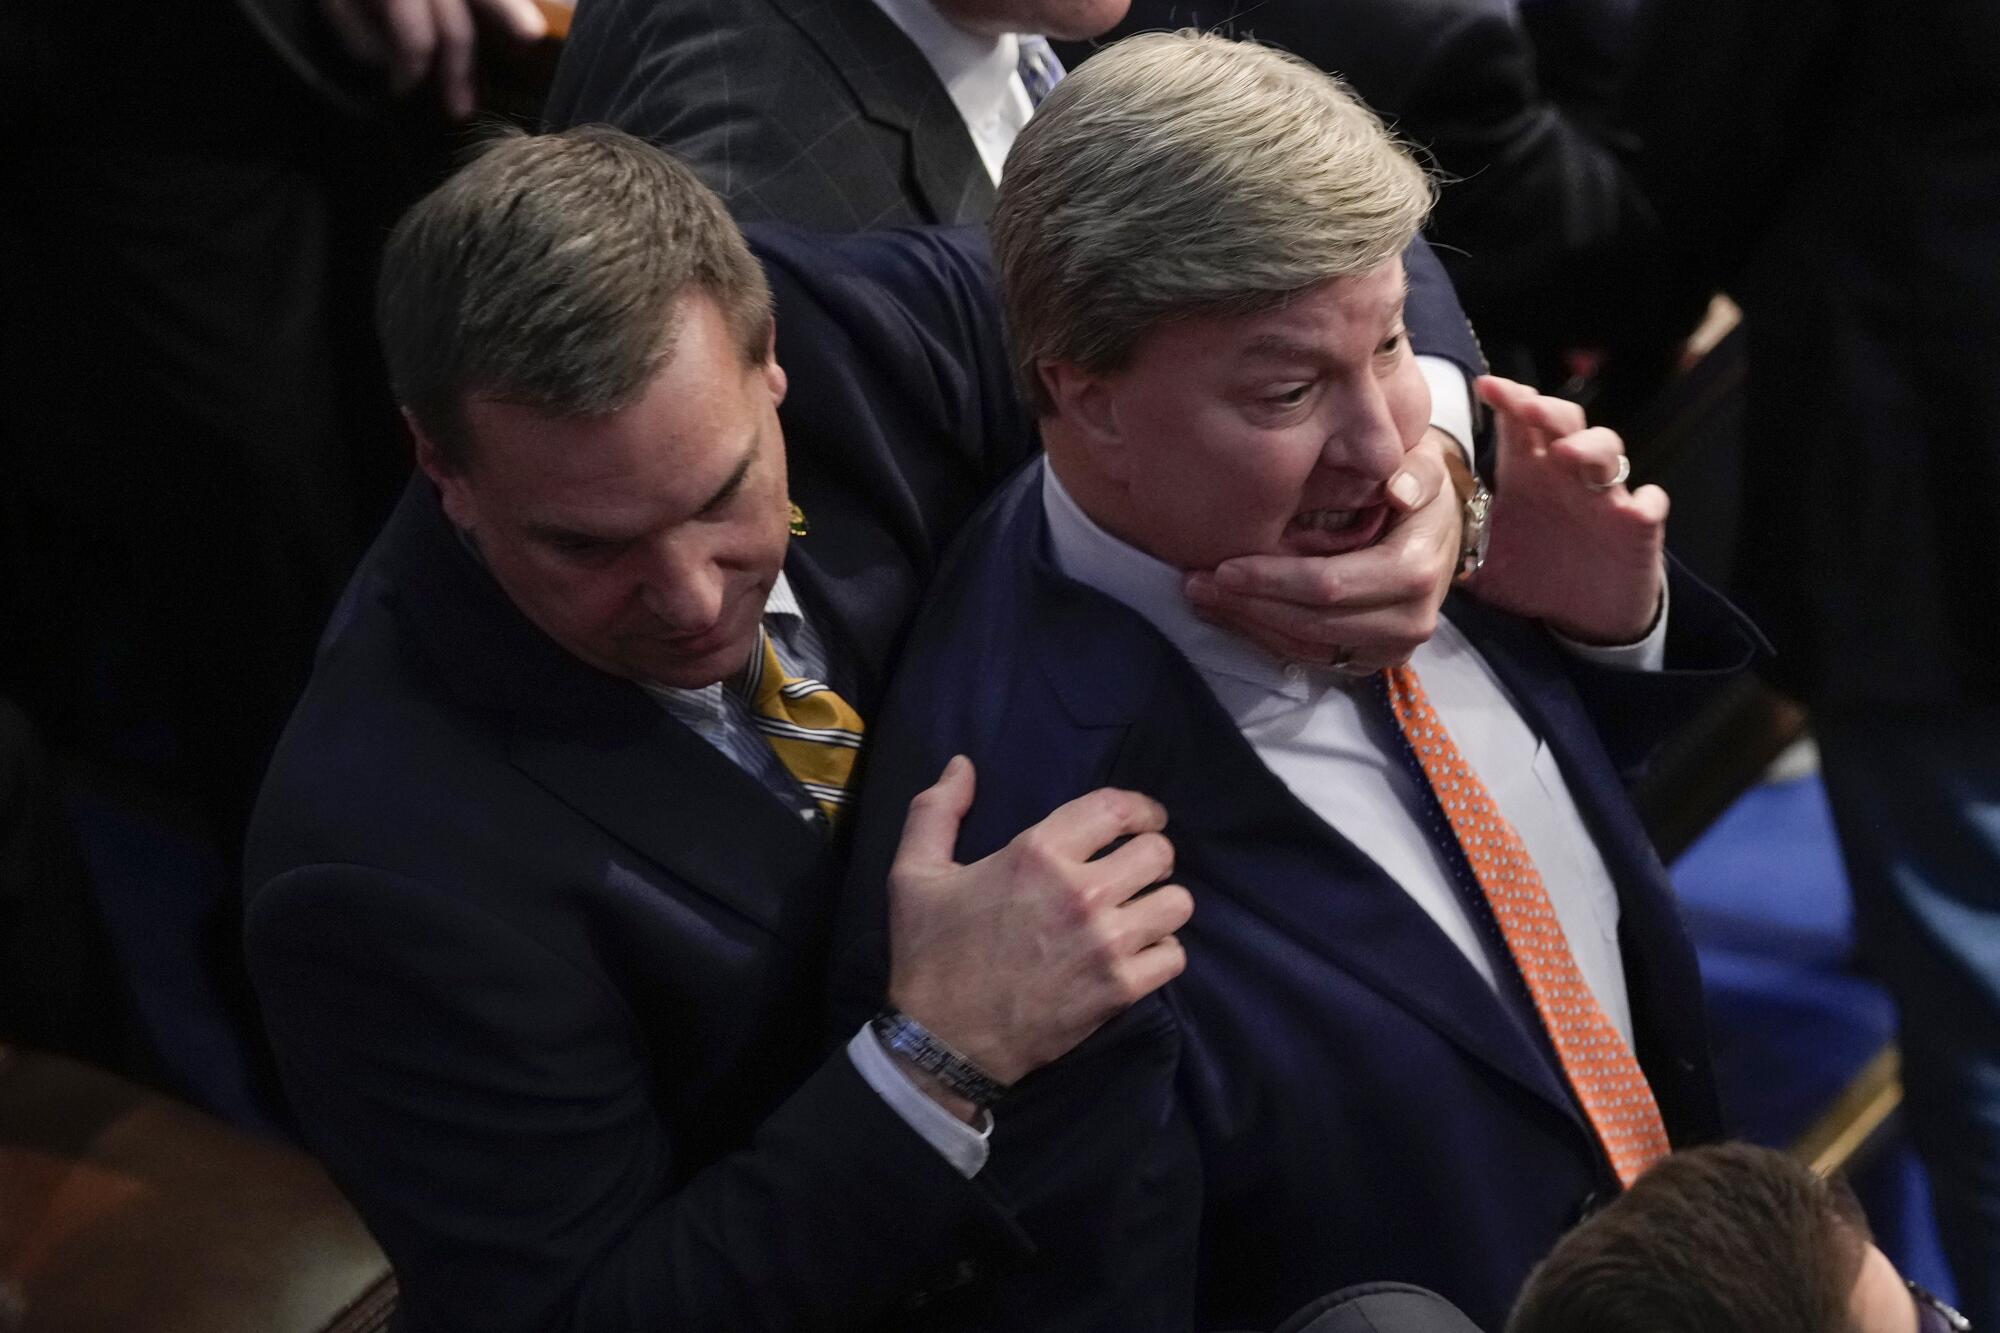 A lawmaker holding another by the chin